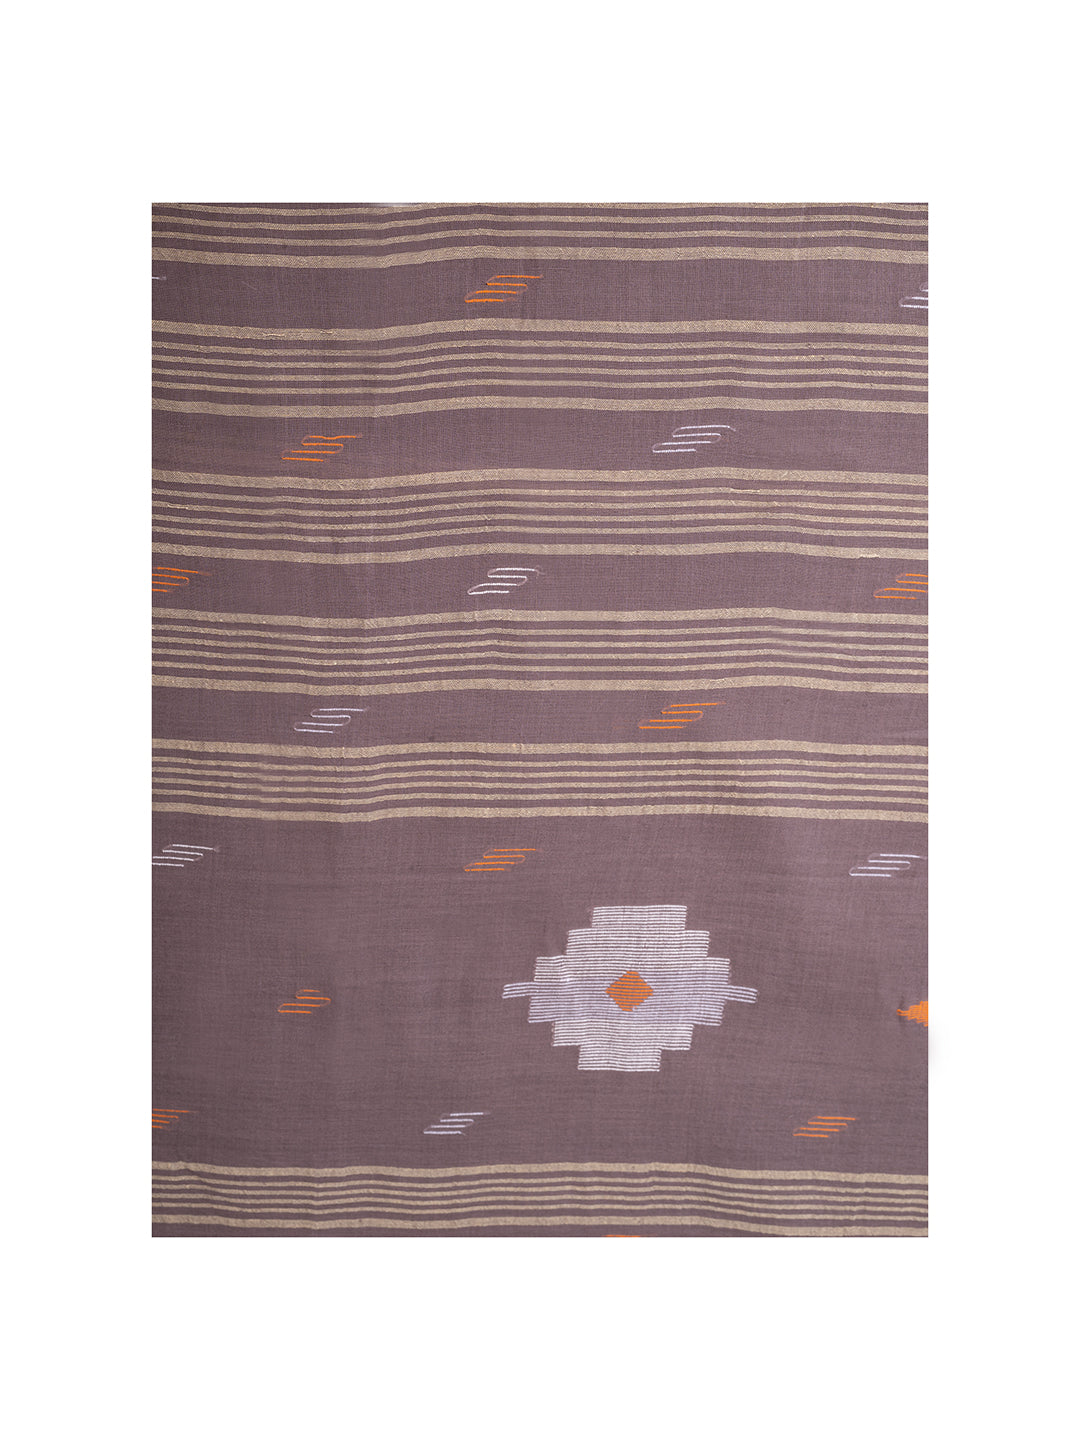 Pale Grey Handcrafted Jamdani Cotton Saree Without Blouse Piece